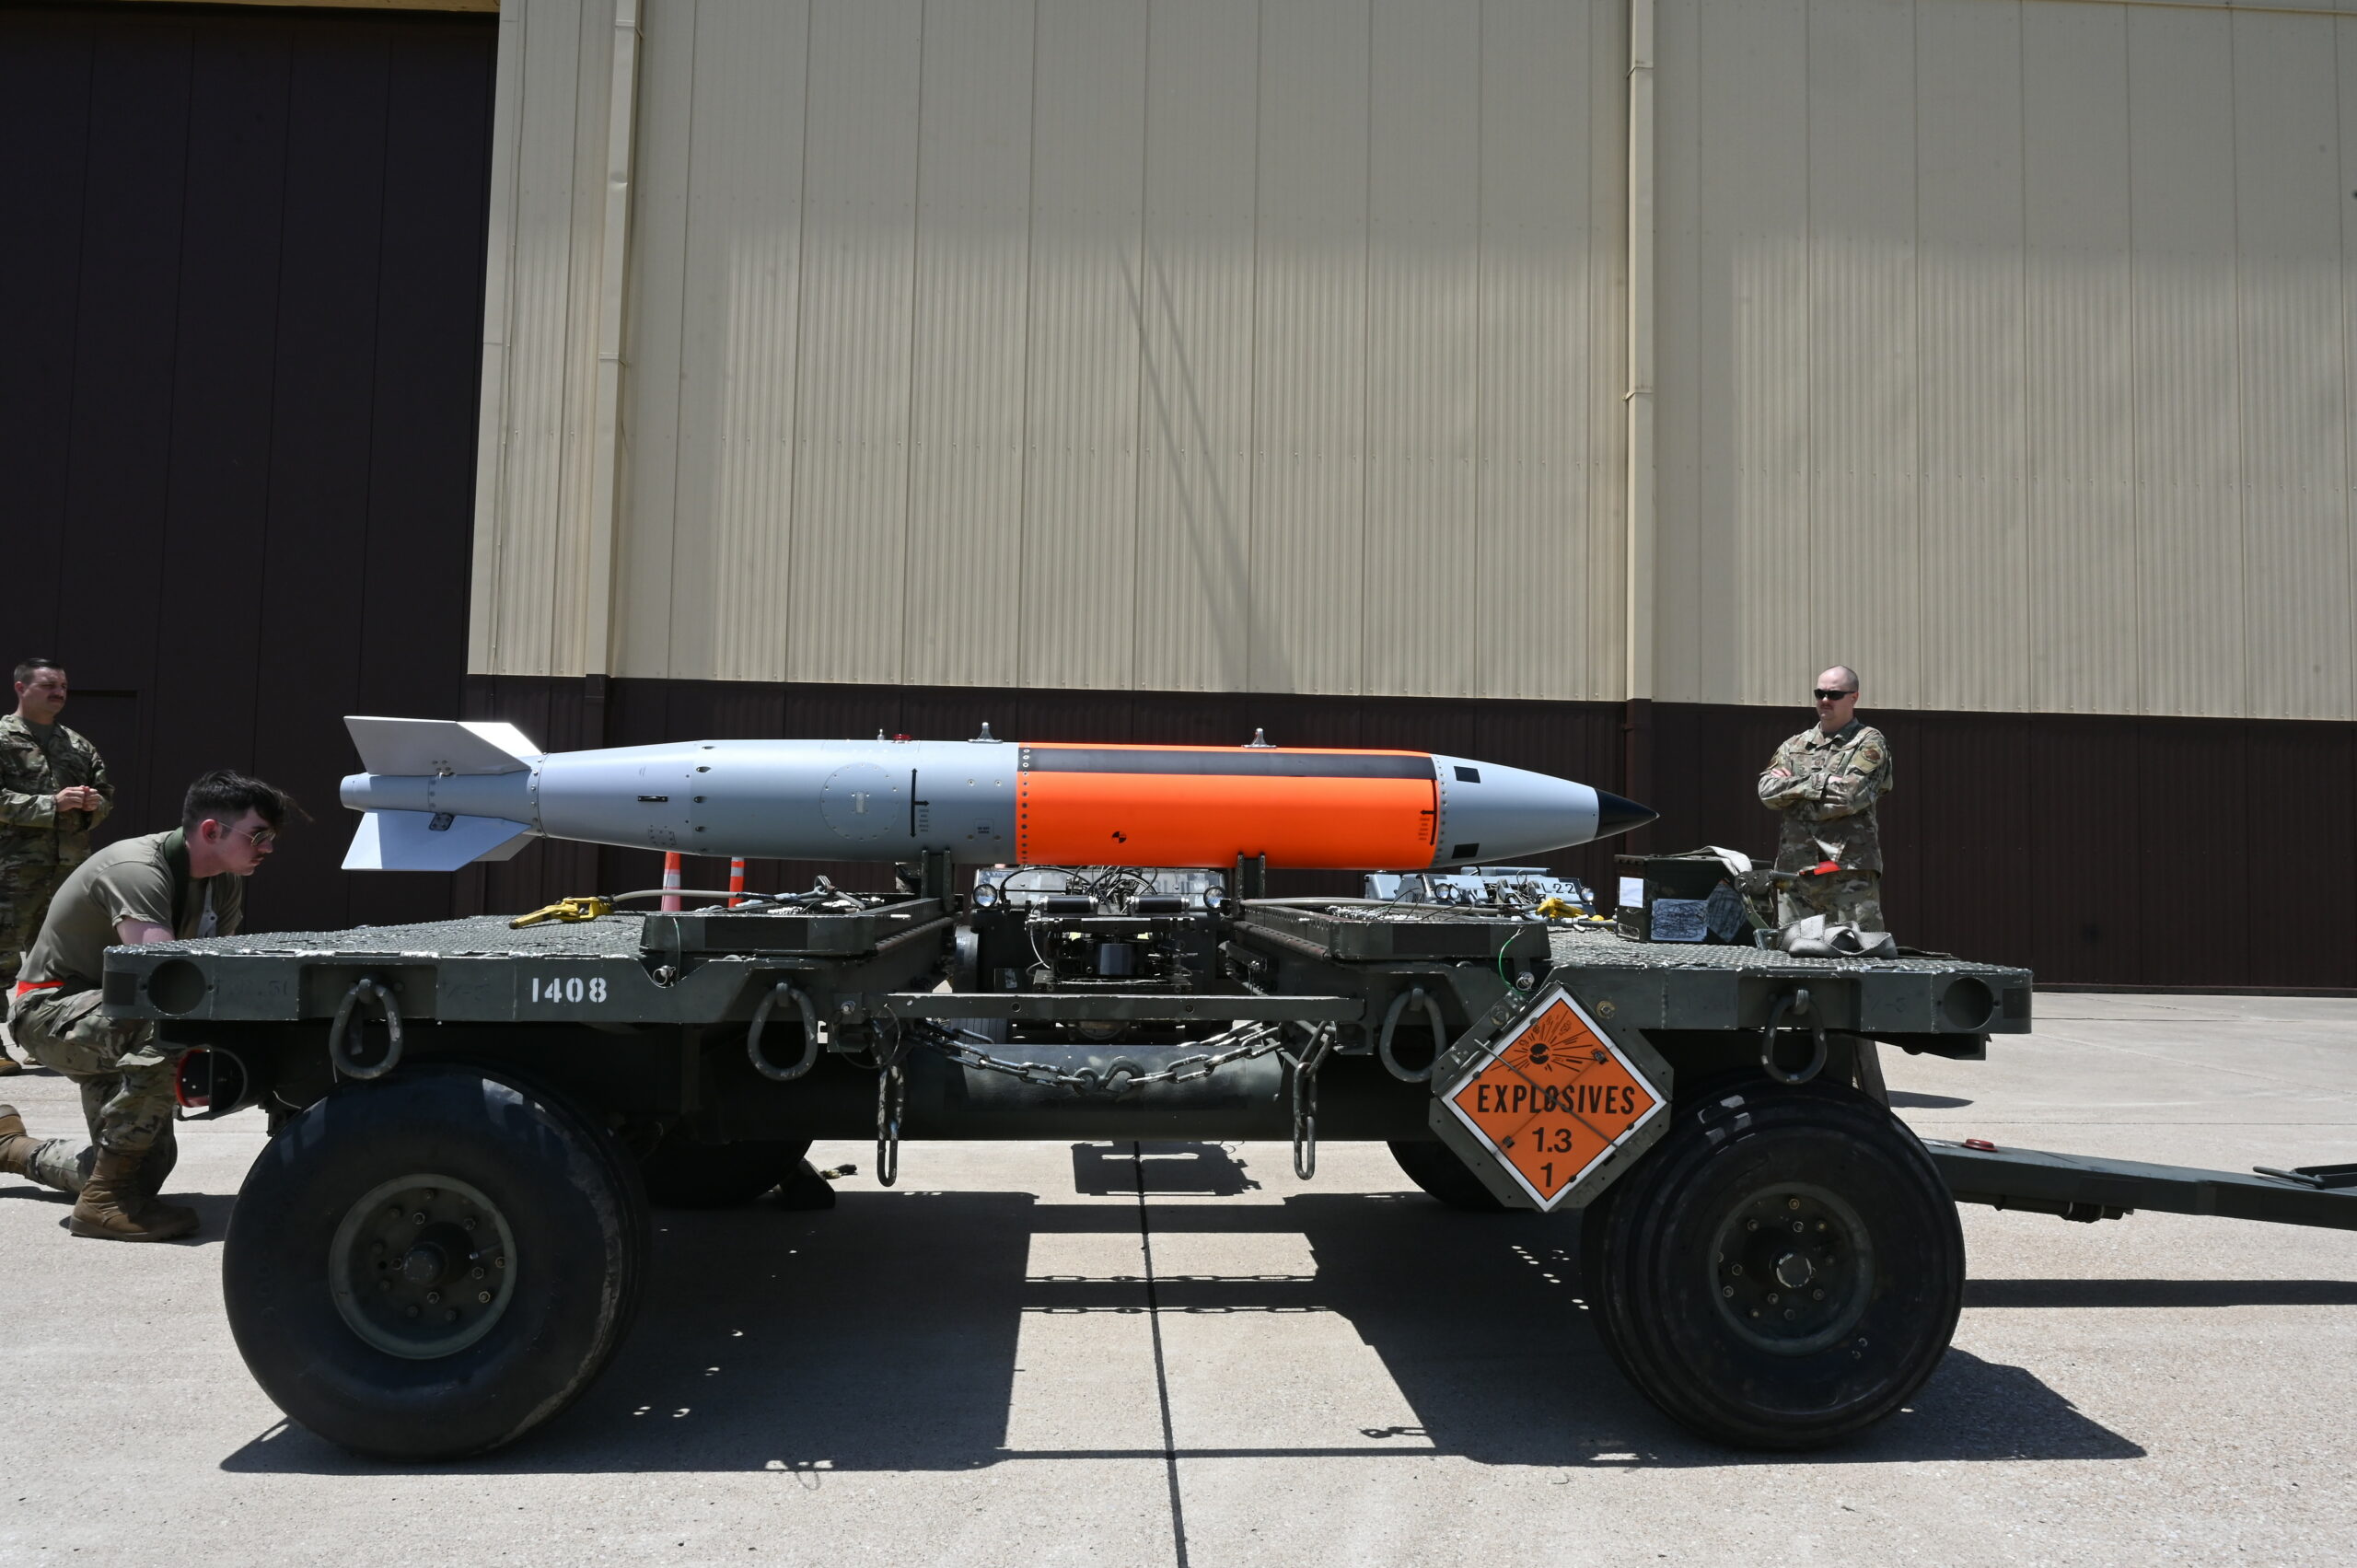 nuclear-capable weapons delivery system